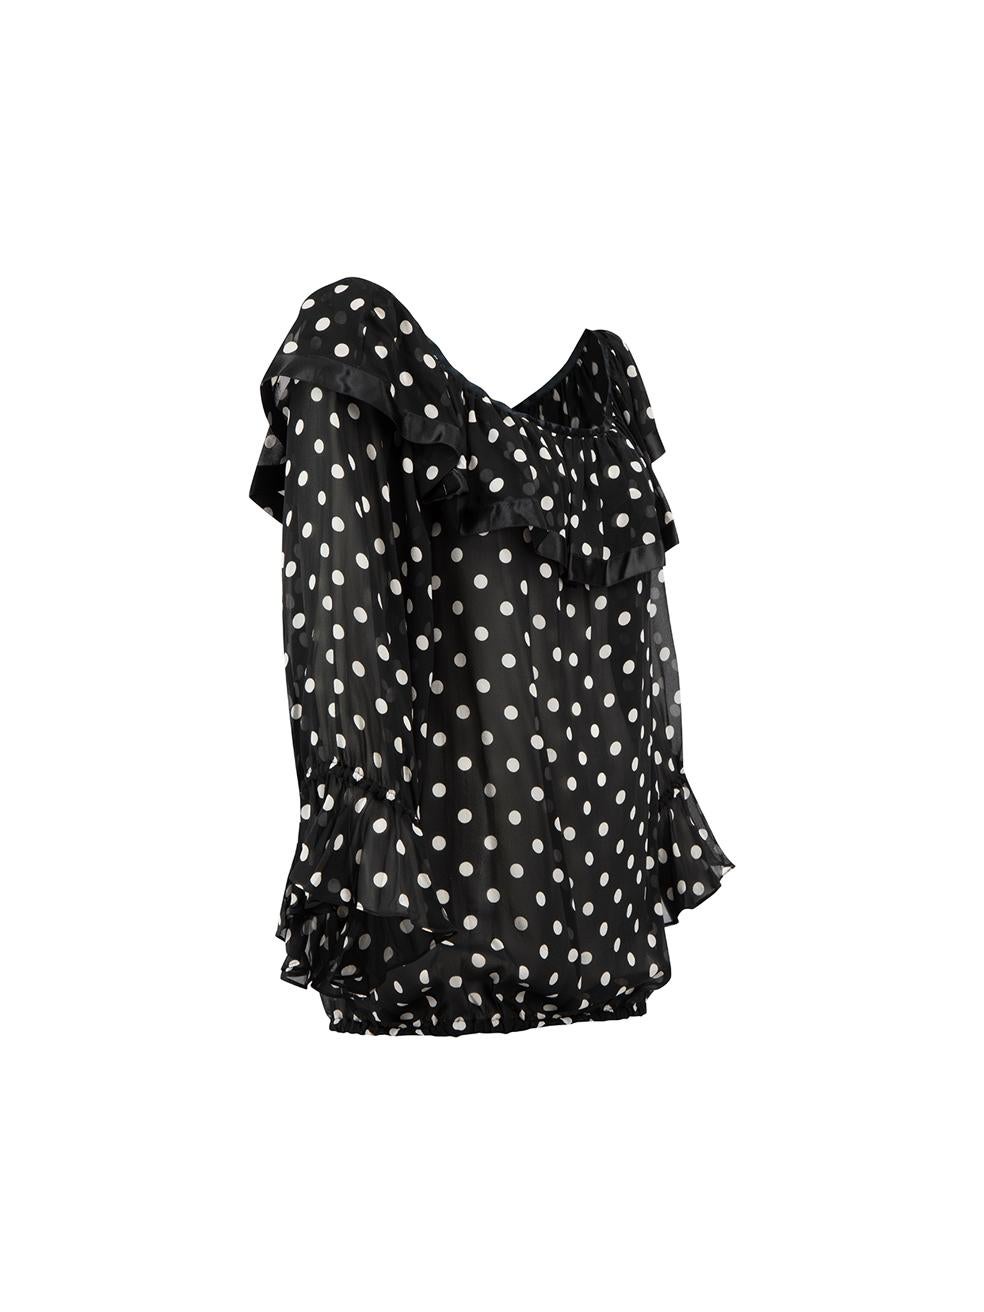 CONDITION is Very good. Minor wear to blouse is evident. Minimal wear to satin binding at shoulders on this used Dolce & Gabbana designer resale item. 



Details


Black

Silk

Long sleeves

Sheer- see through

Off the shoulder

Polkadot